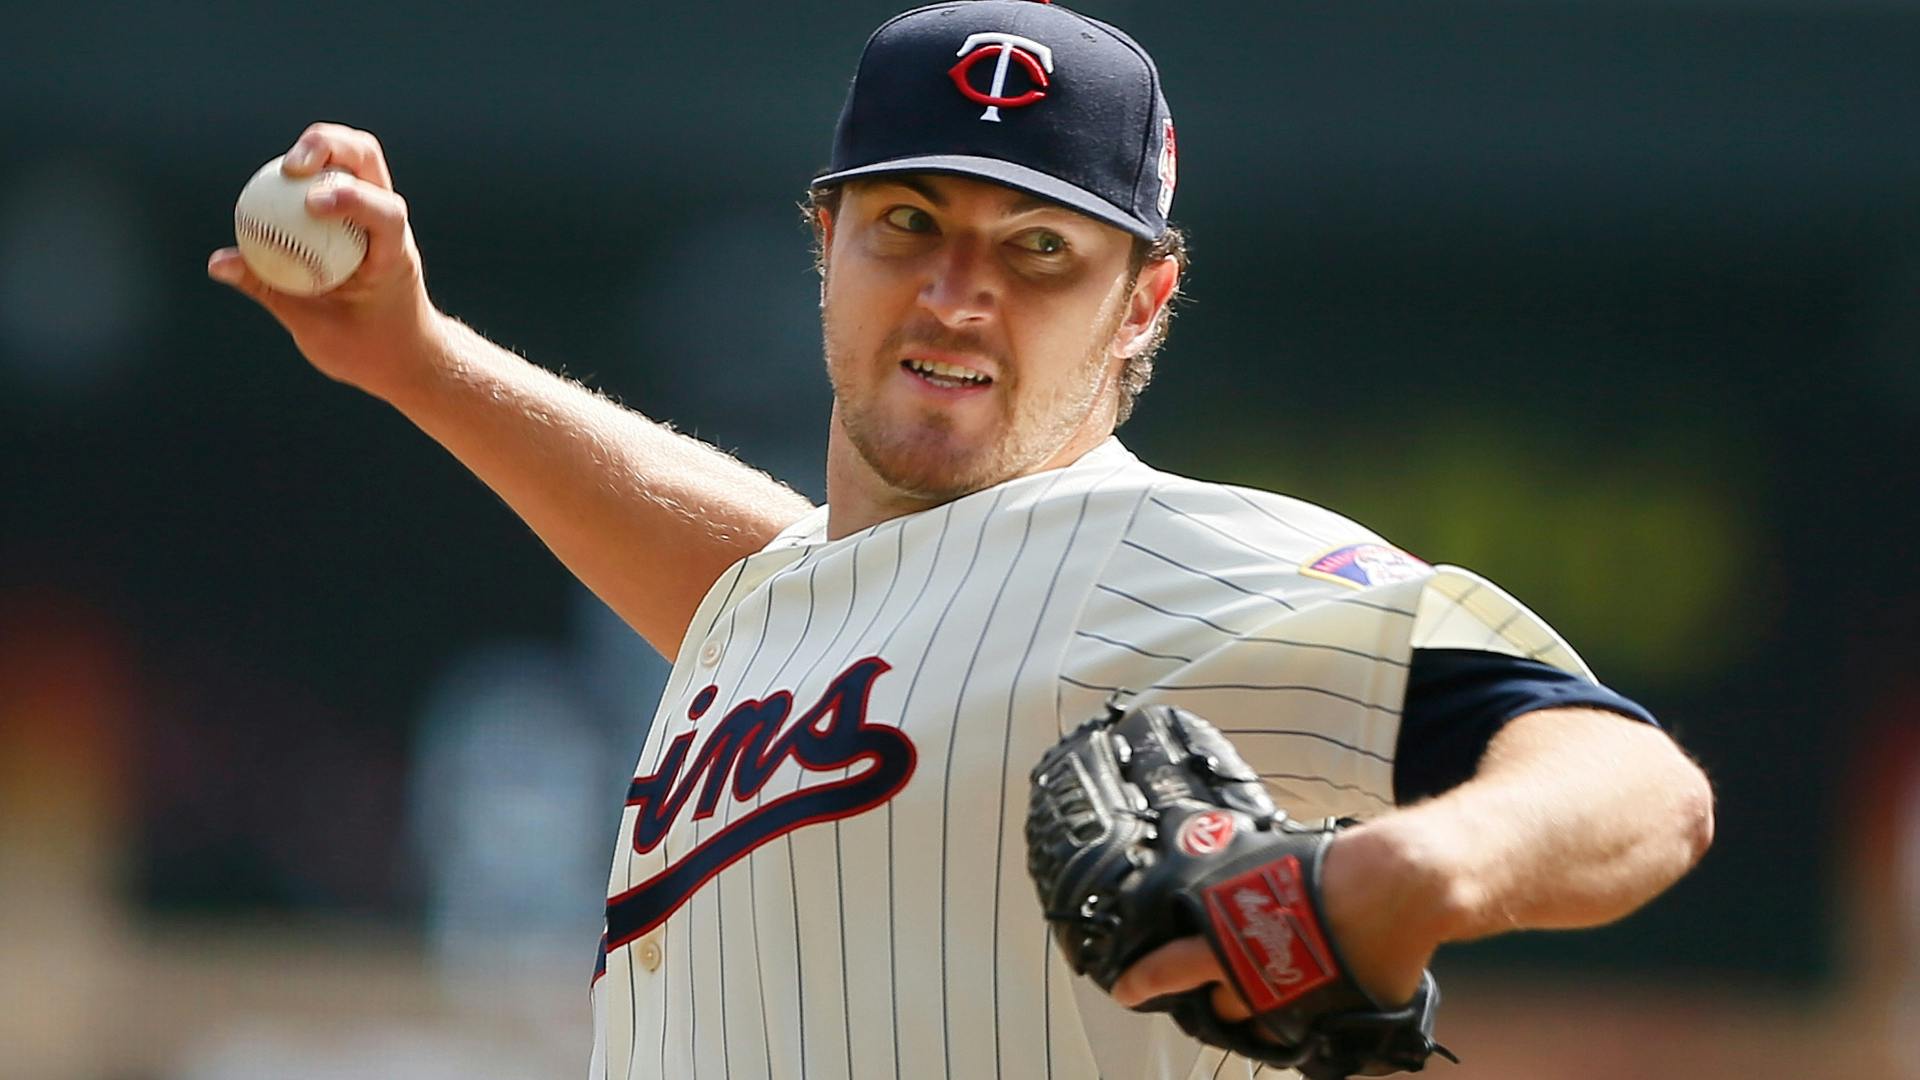 Twins righthander gave up four runs in the first inning on Wednesday